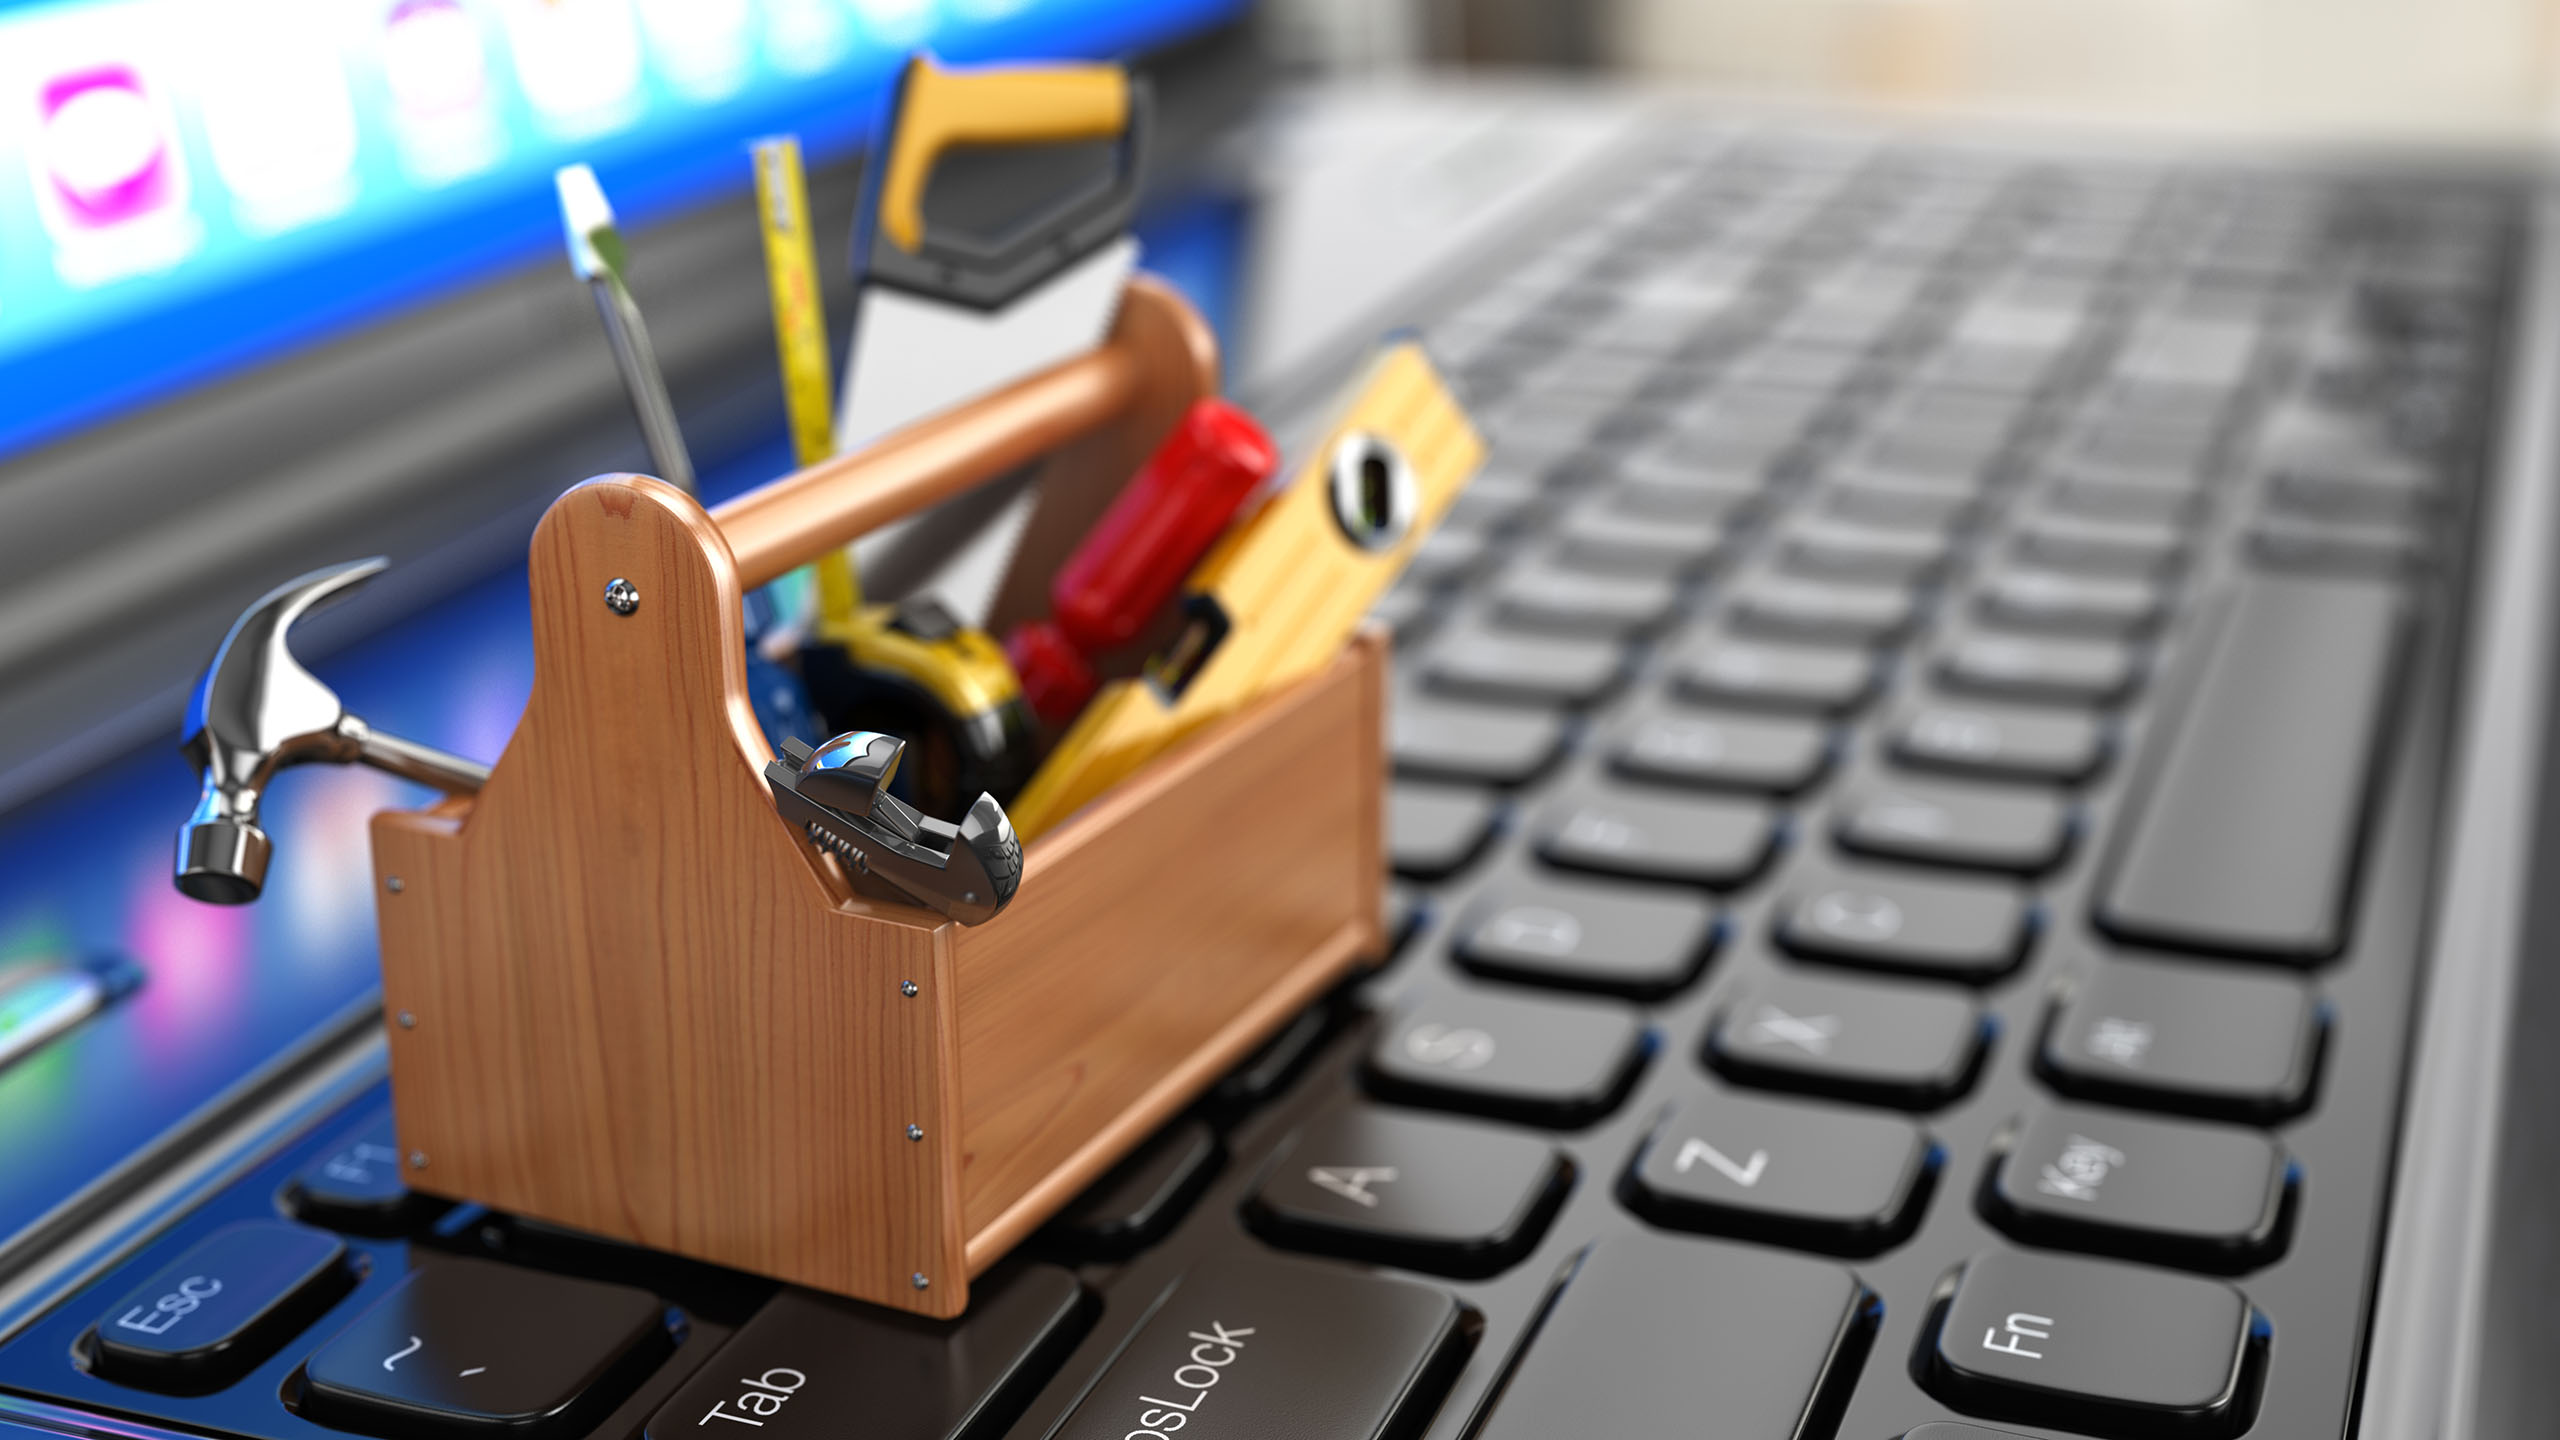 14 free tools: Obscure yet helpful software from Adobe, Microsoft, and more